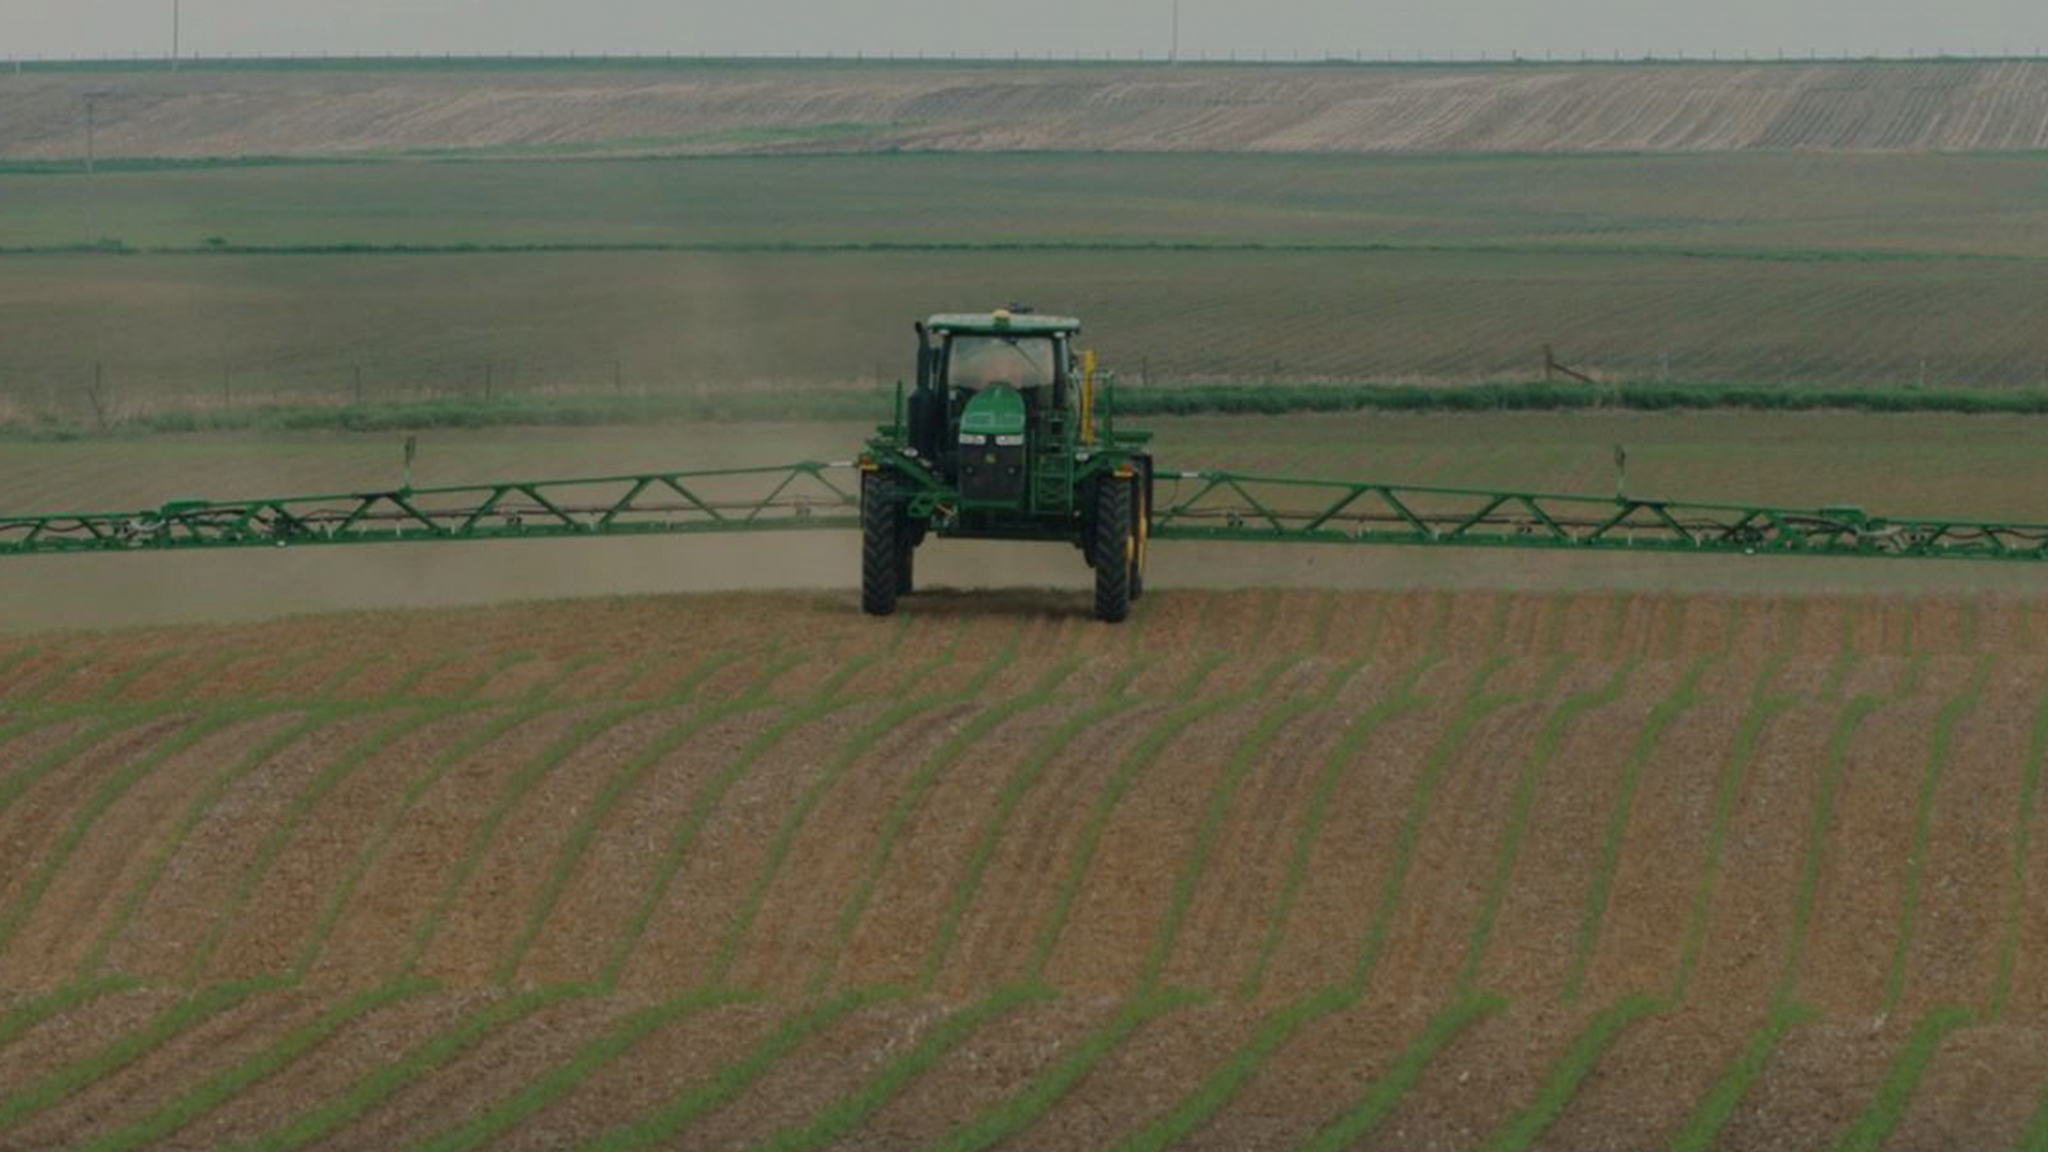 This image shows a machine spraying fields.